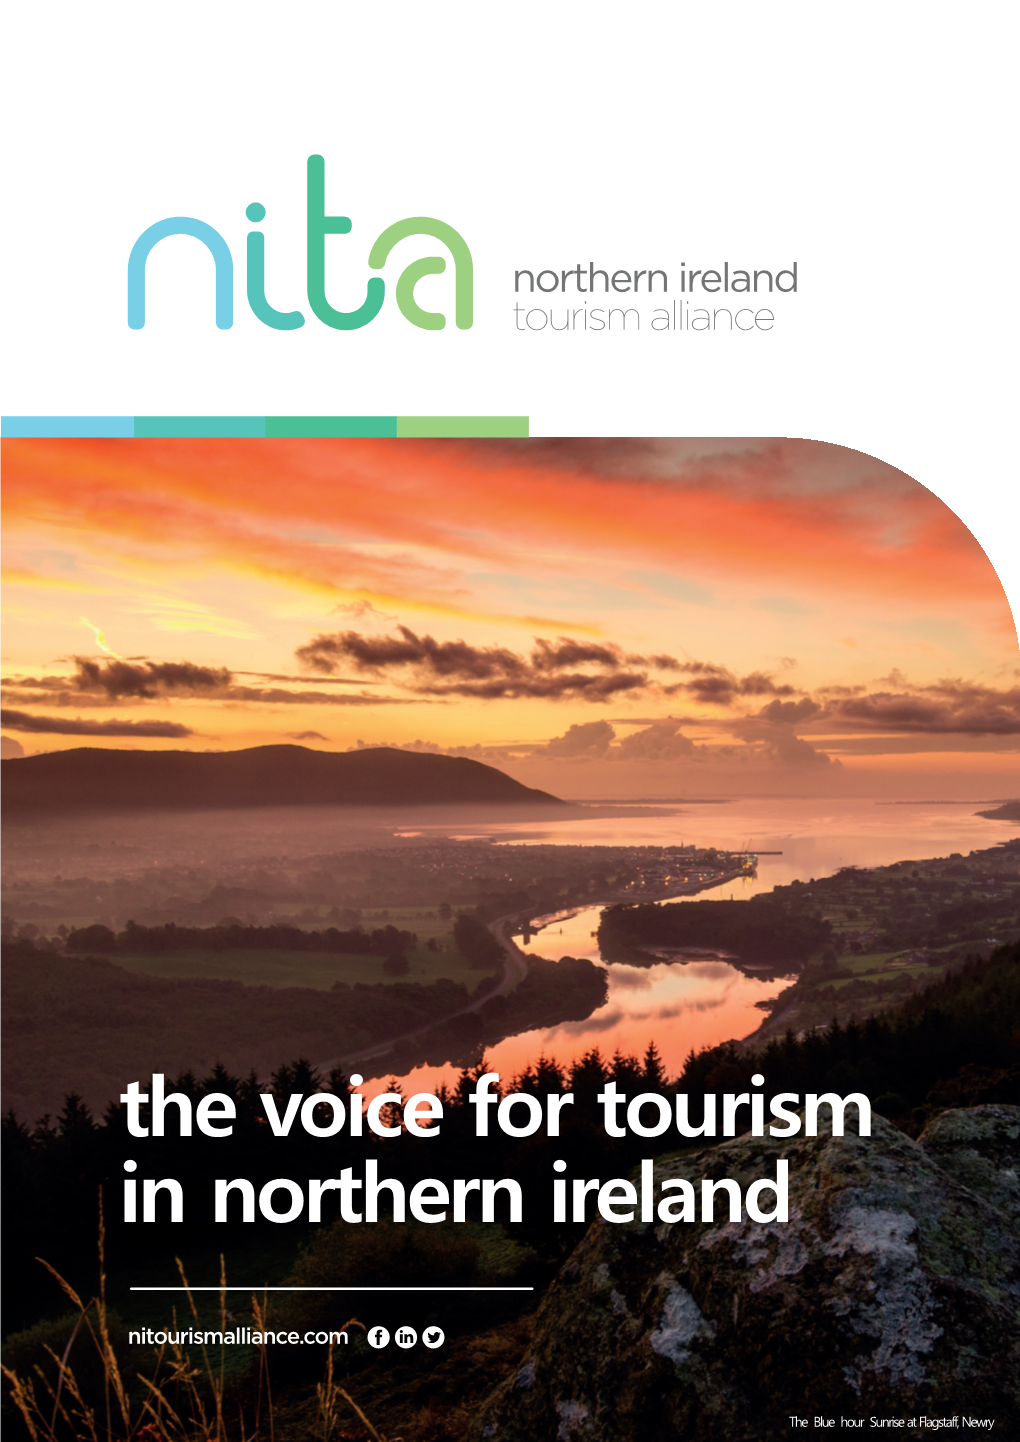 The Voice for Tourism in Northern Ireland